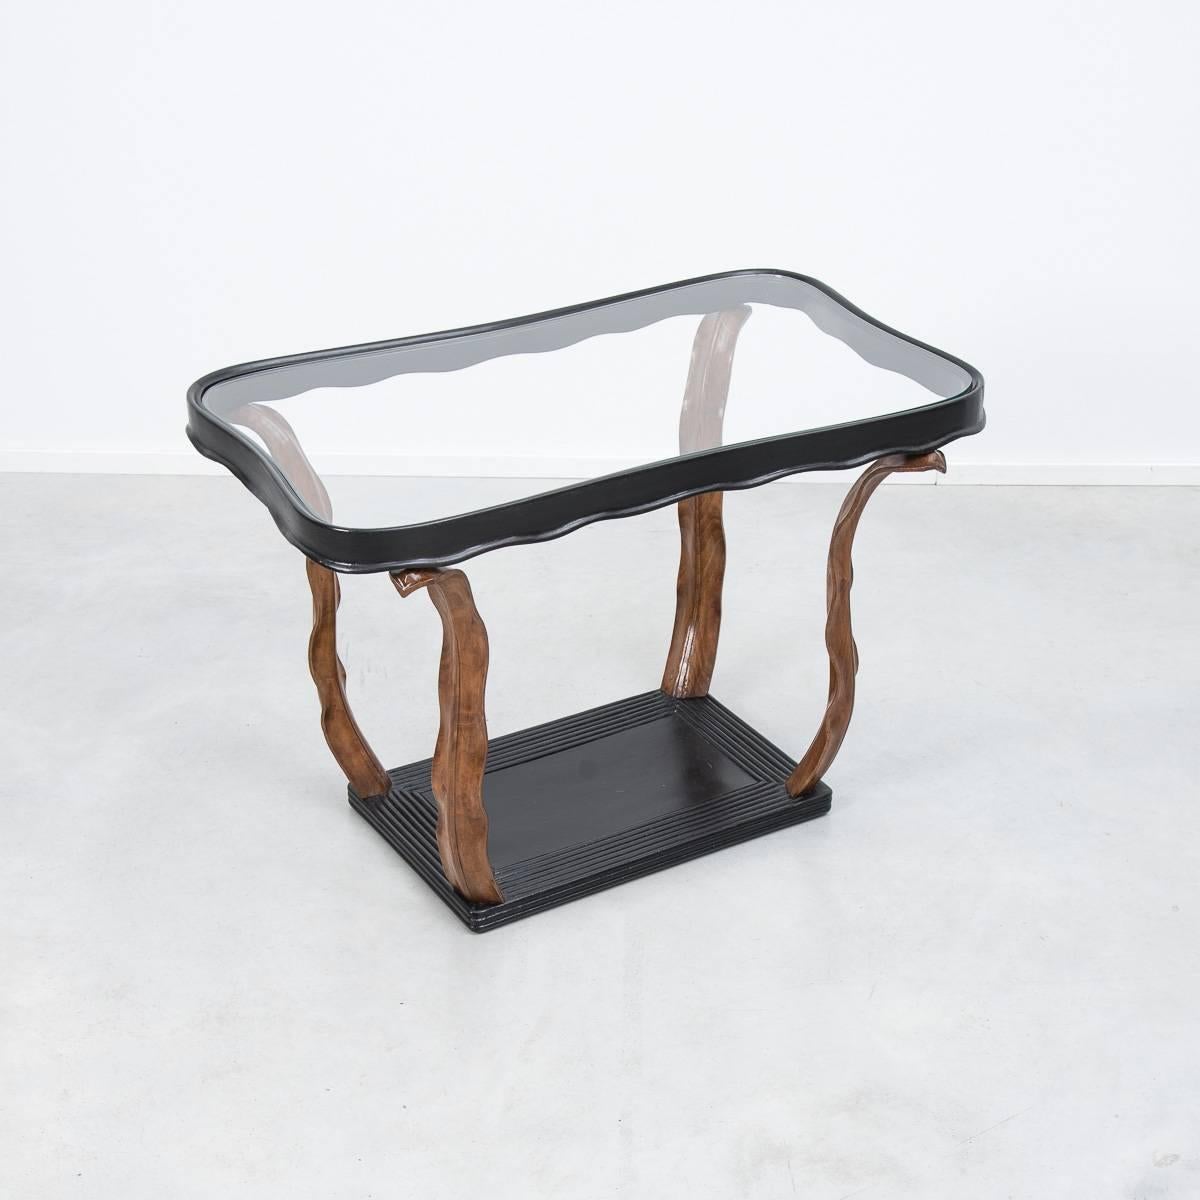 A refined side or coffee table designed by Milanese architect Paolo Buffa. The glass top is supported by a kidney shaped wood frame, which stands on four hand-carved wooden leaves. An exceptional piece of craftsmanship in the 1940s decorative